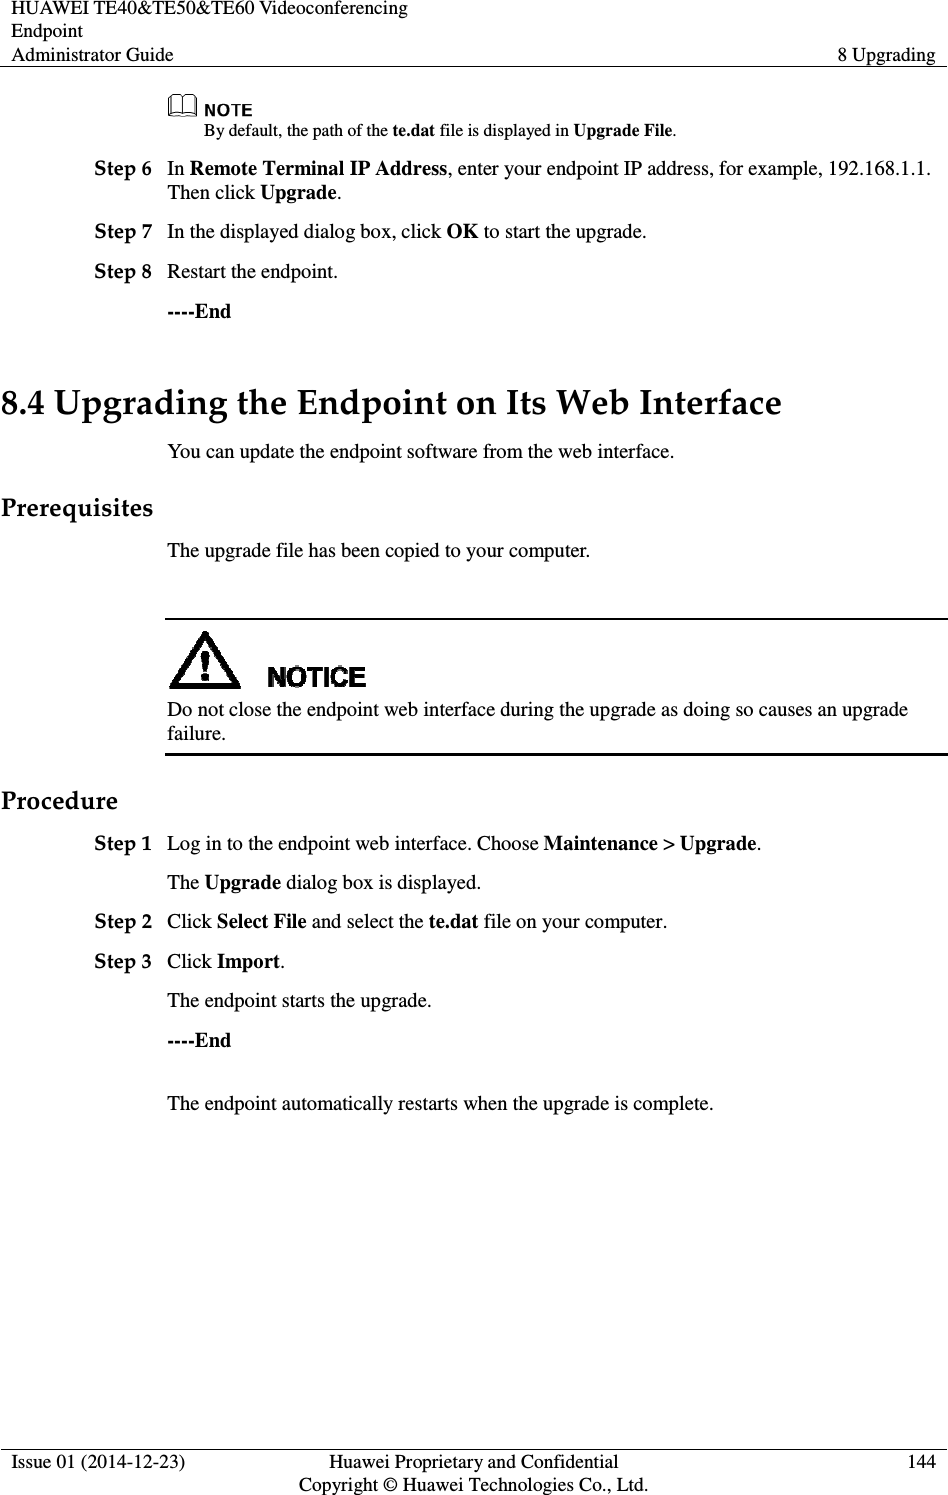 HUAWEI TE40&amp;TE50&amp;TE60 Videoconferencing Endpoint Administrator Guide  8 Upgrading  Issue 01 (2014-12-23)  Huawei Proprietary and Confidential                                     Copyright © Huawei Technologies Co., Ltd. 144   By default, the path of the te.dat file is displayed in Upgrade File. Step 6 In Remote Terminal IP Address, enter your endpoint IP address, for example, 192.168.1.1. Then click Upgrade. Step 7 In the displayed dialog box, click OK to start the upgrade. Step 8 Restart the endpoint. ----End 8.4 Upgrading the Endpoint on Its Web Interface You can update the endpoint software from the web interface. Prerequisites The upgrade file has been copied to your computer.   Do not close the endpoint web interface during the upgrade as doing so causes an upgrade failure. Procedure Step 1 Log in to the endpoint web interface. Choose Maintenance &gt; Upgrade. The Upgrade dialog box is displayed. Step 2 Click Select File and select the te.dat file on your computer. Step 3 Click Import. The endpoint starts the upgrade. ----End The endpoint automatically restarts when the upgrade is complete.   